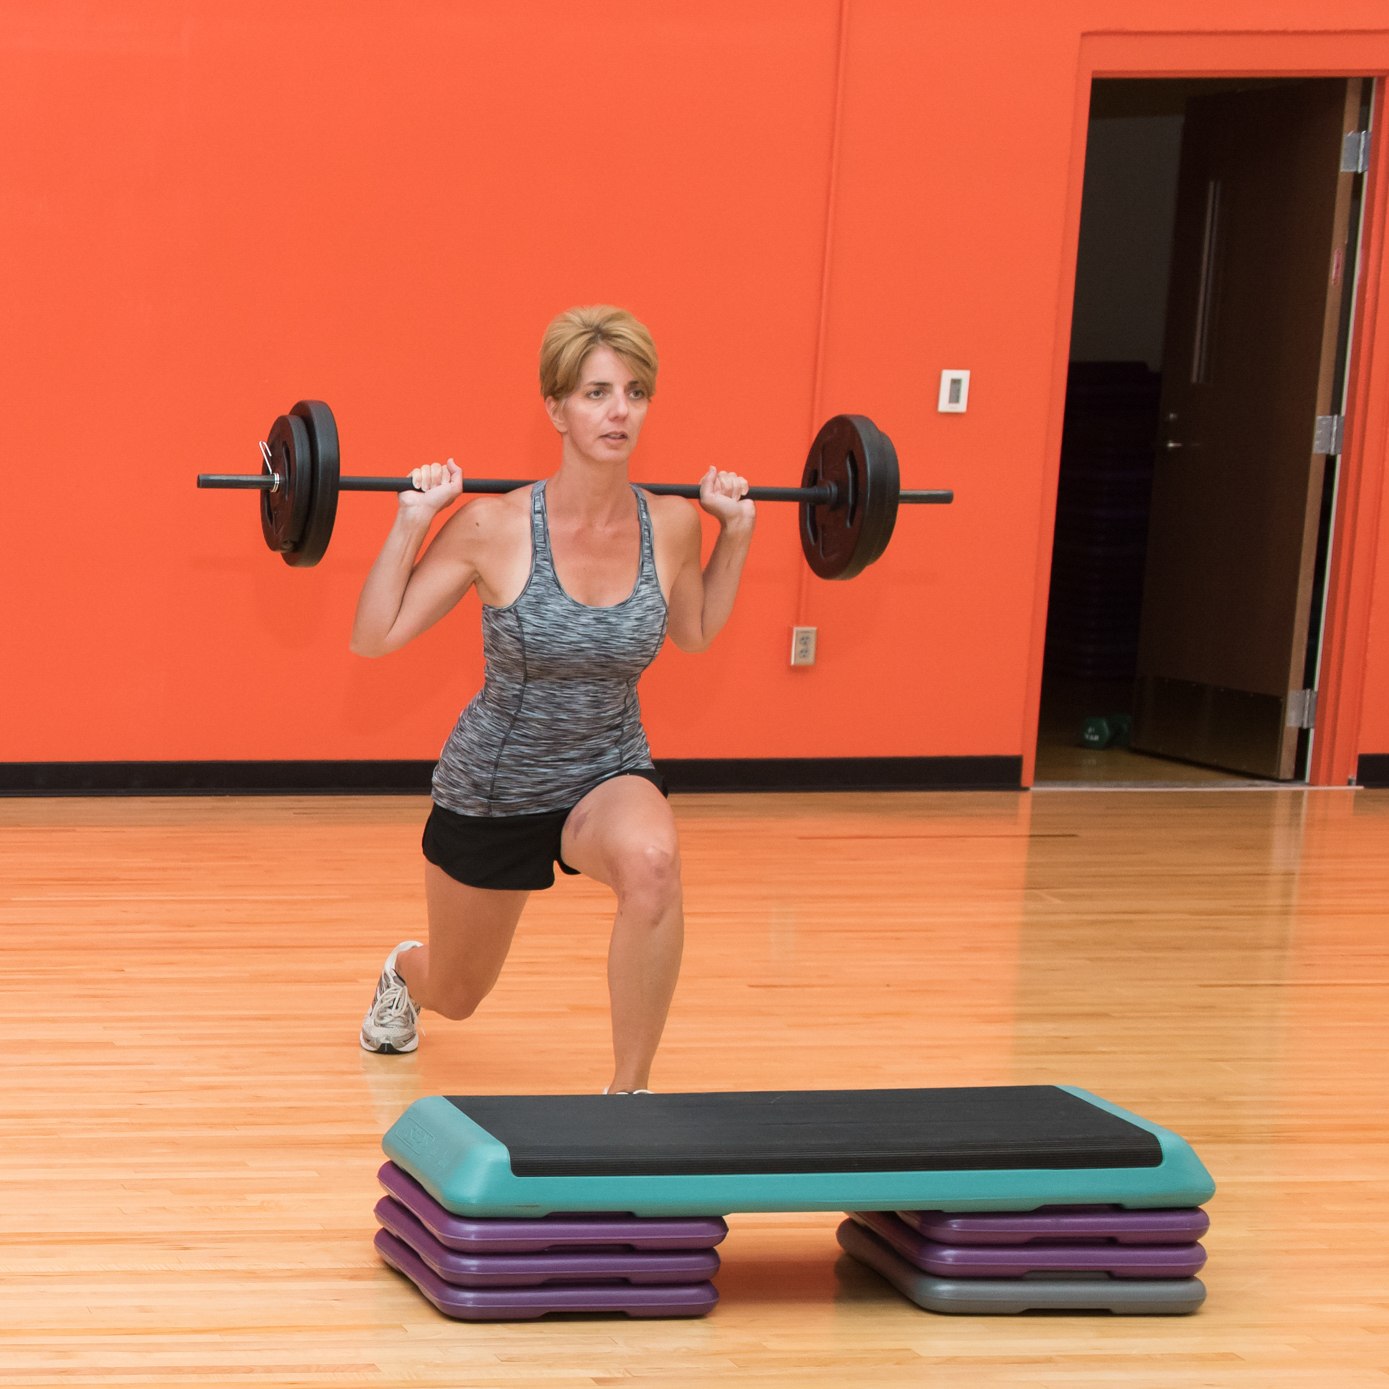 Woman performing a lunge while holding a barbell over her shoulders, wearing a gray tank top and black shorts. 